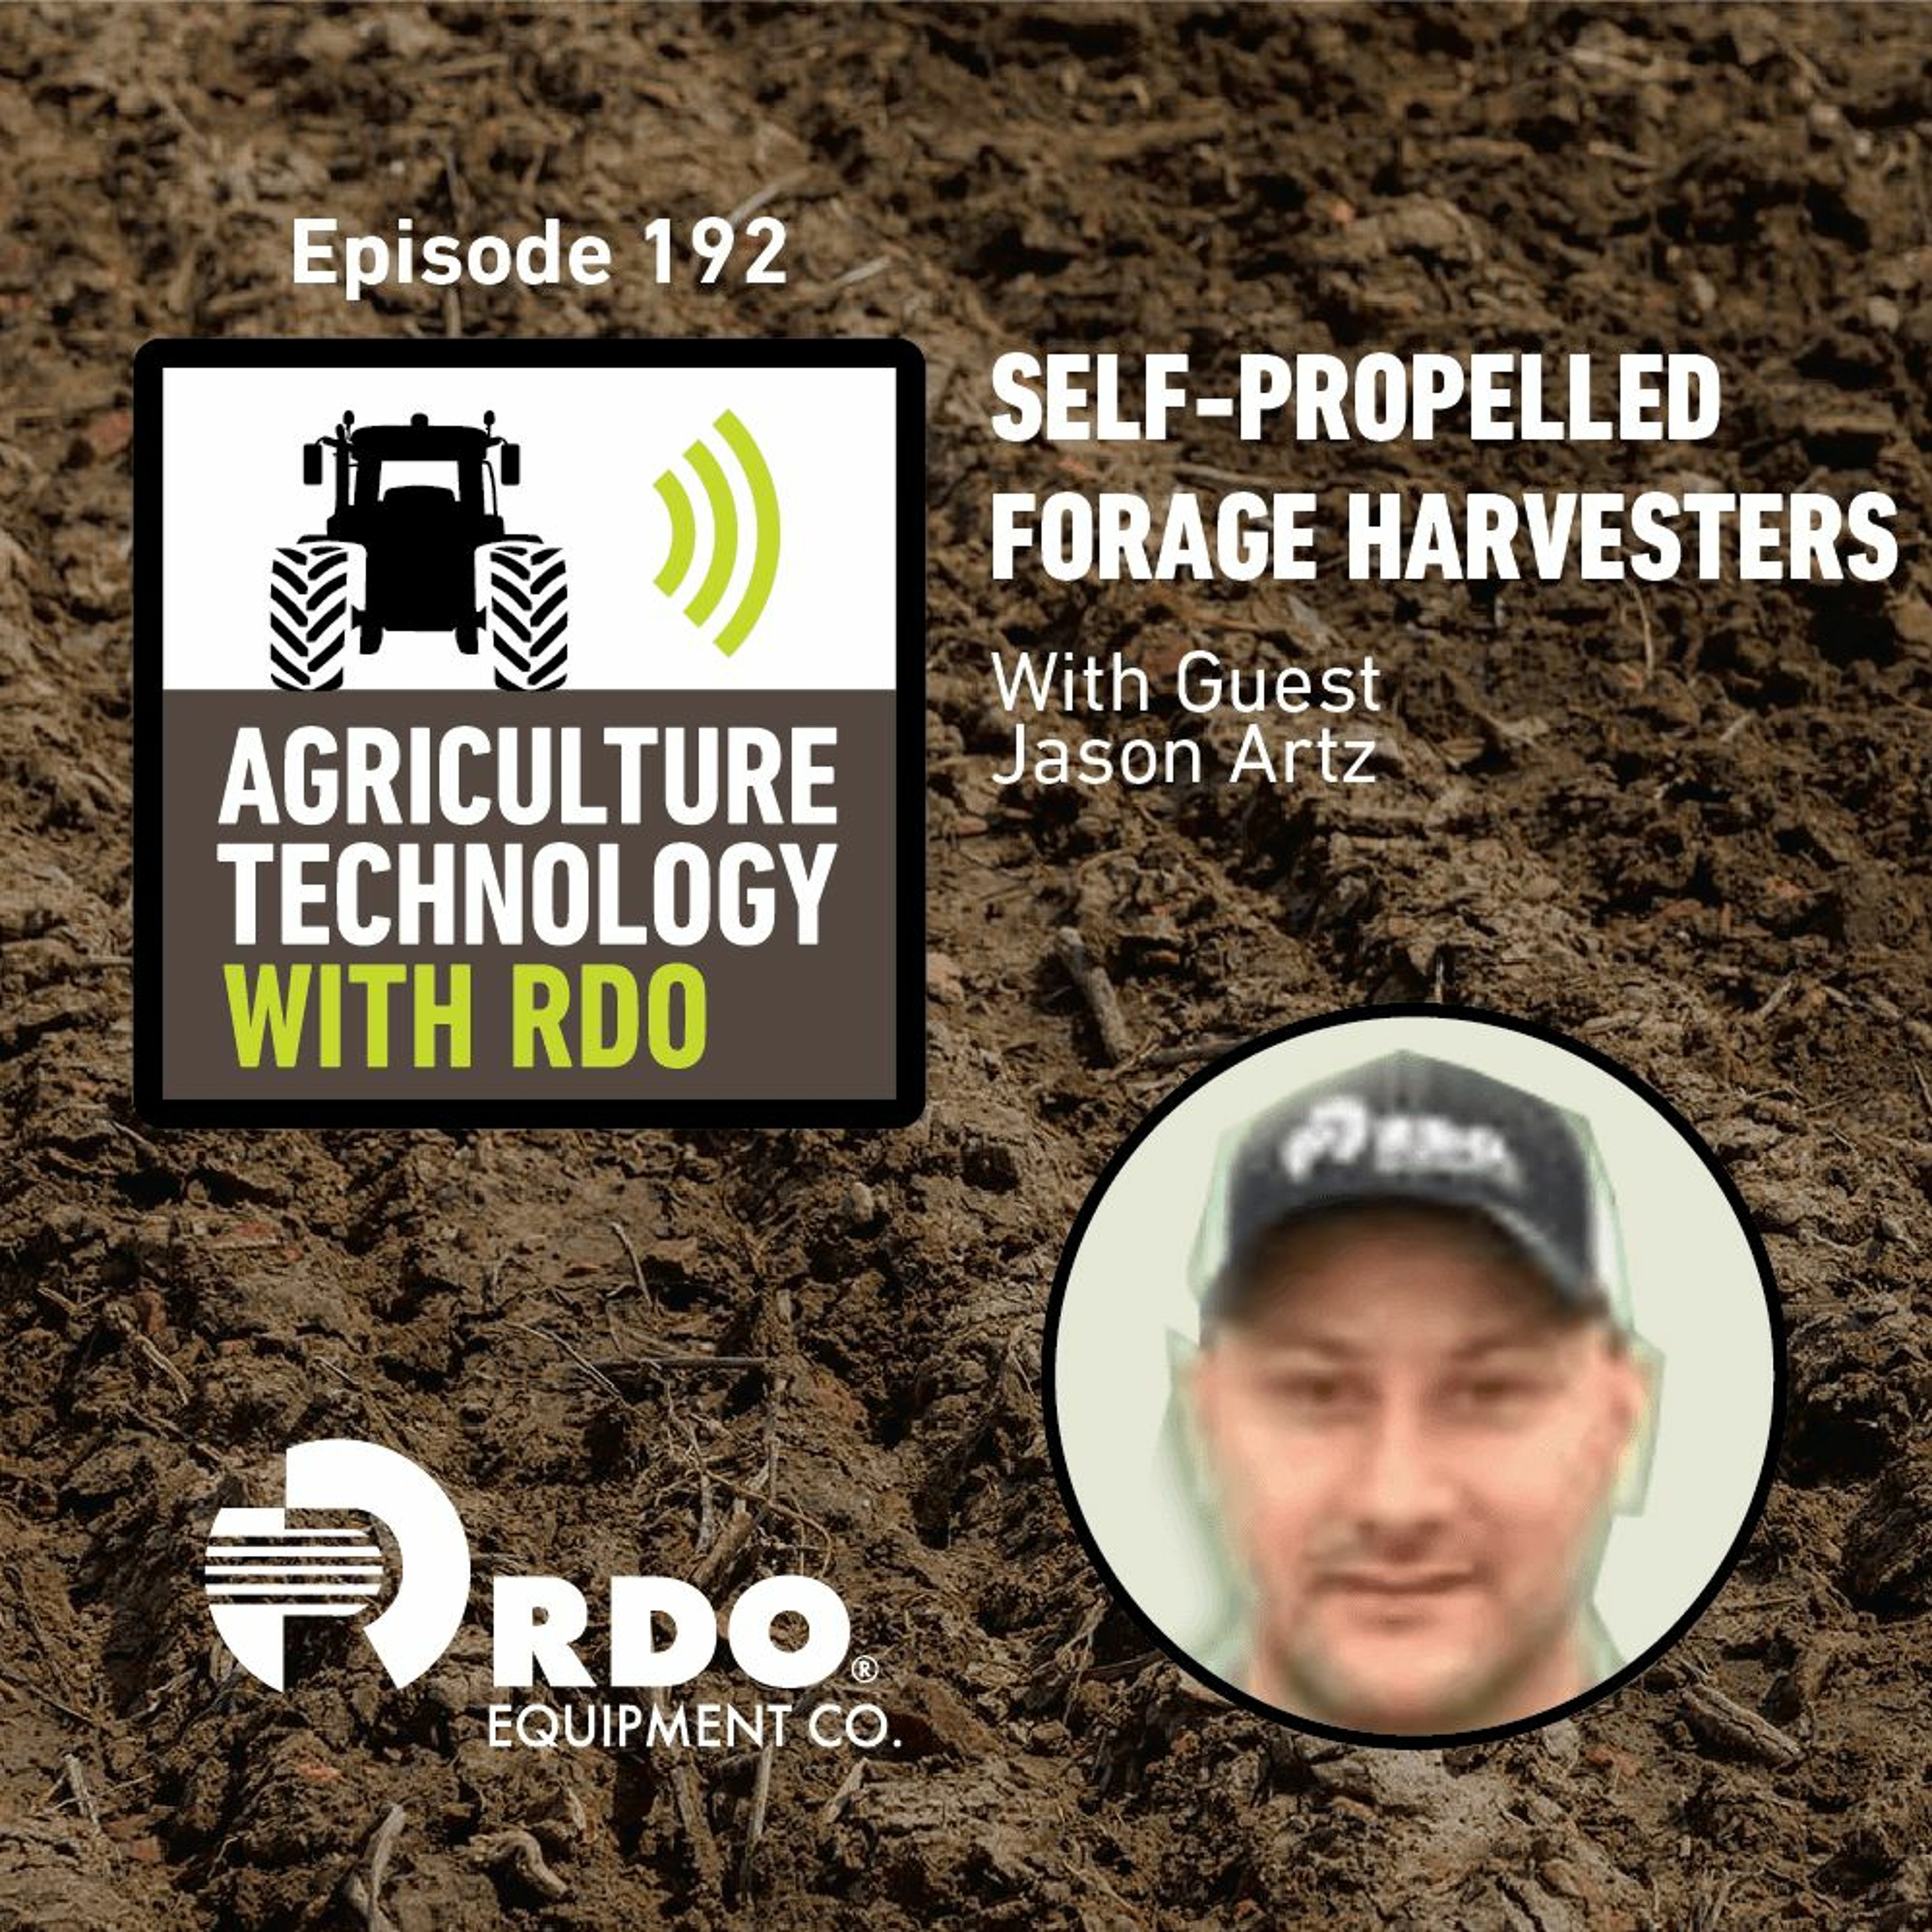 Ep. 192 - Self-Propelled Forage Harvesters with Guest Jason Artz